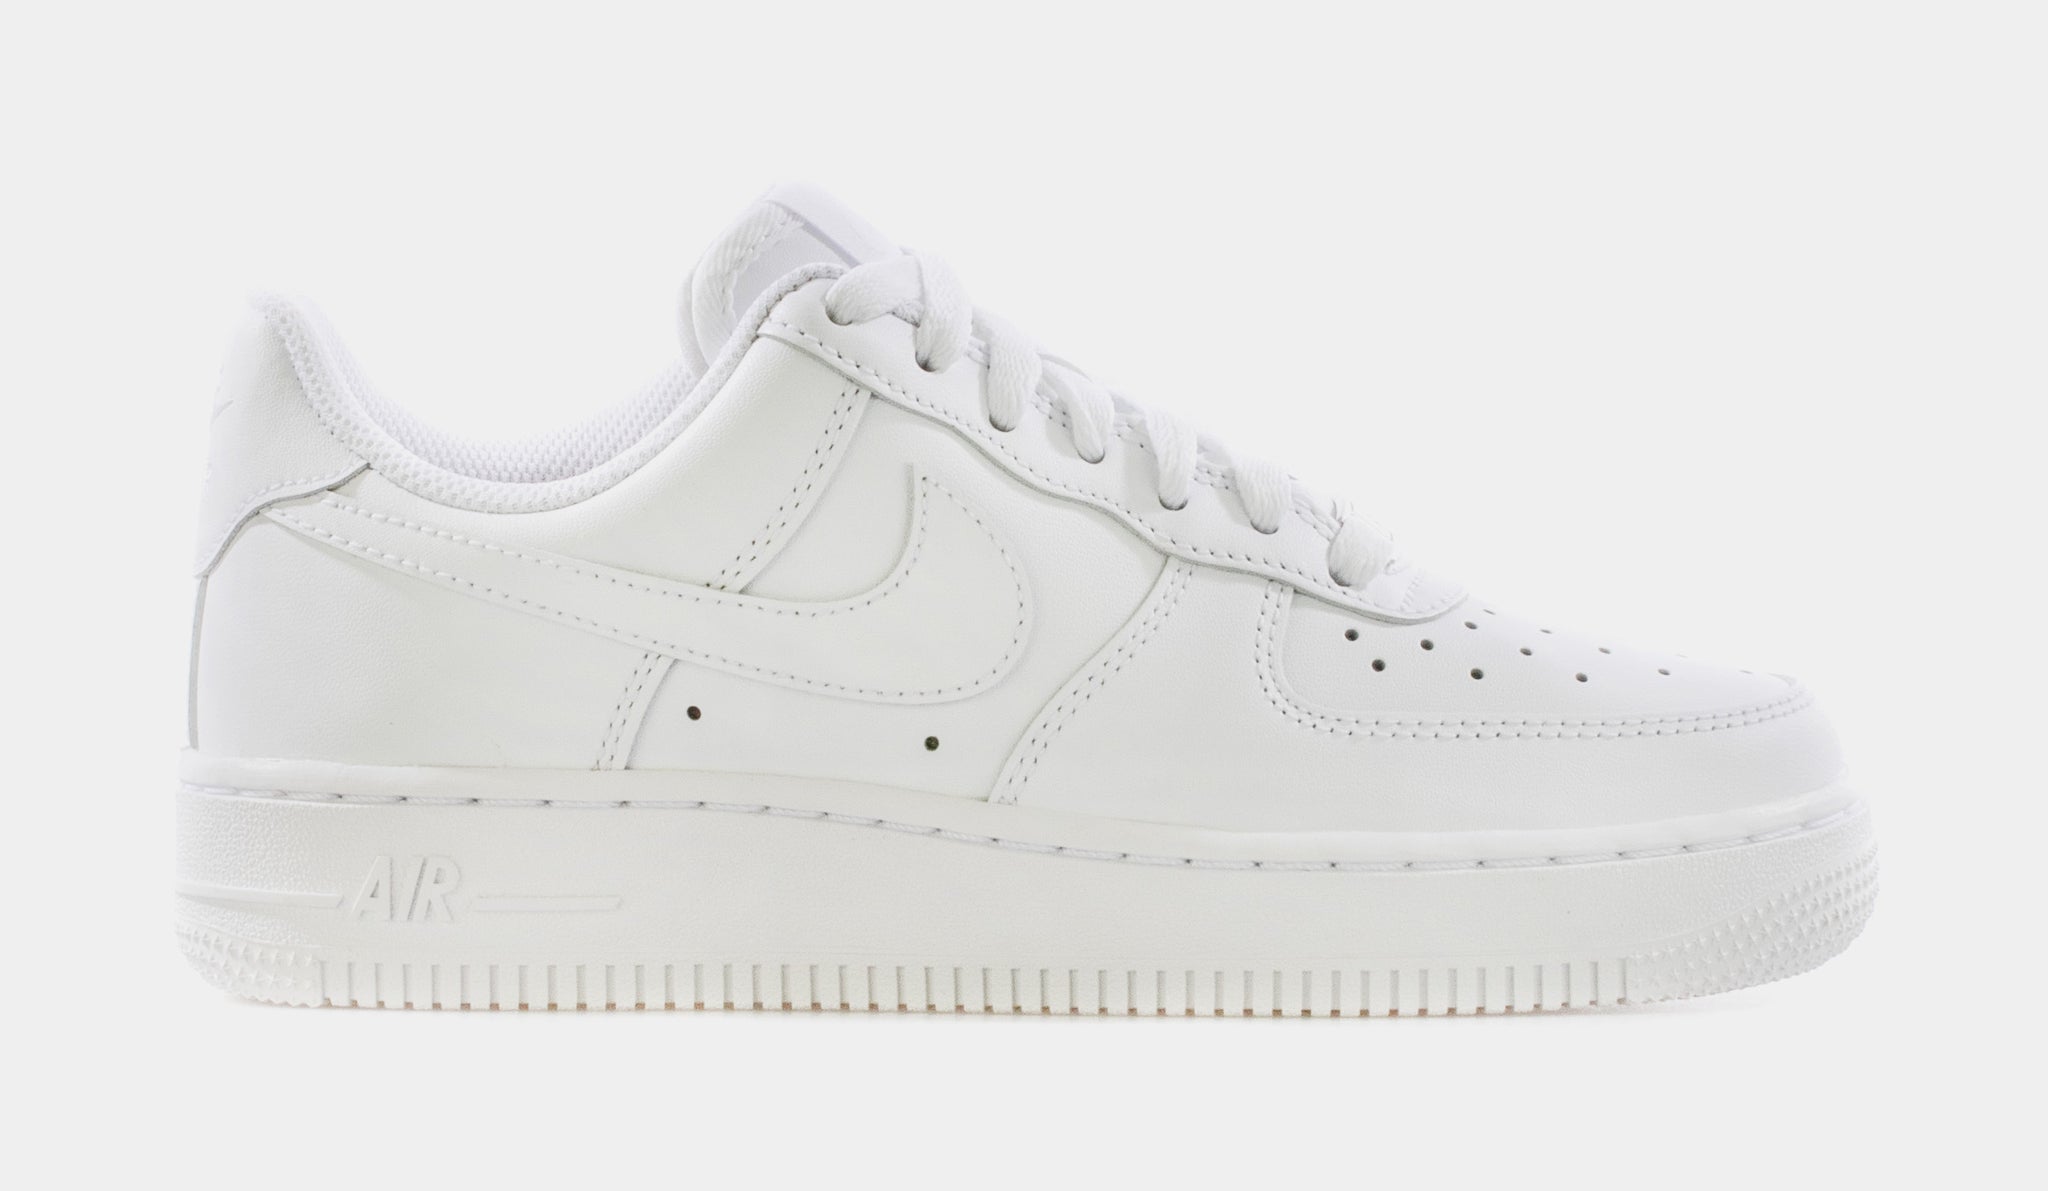 Air Force 1 07 Womens Lifestyle Shoe White DD8959-100 – Shoe Palace